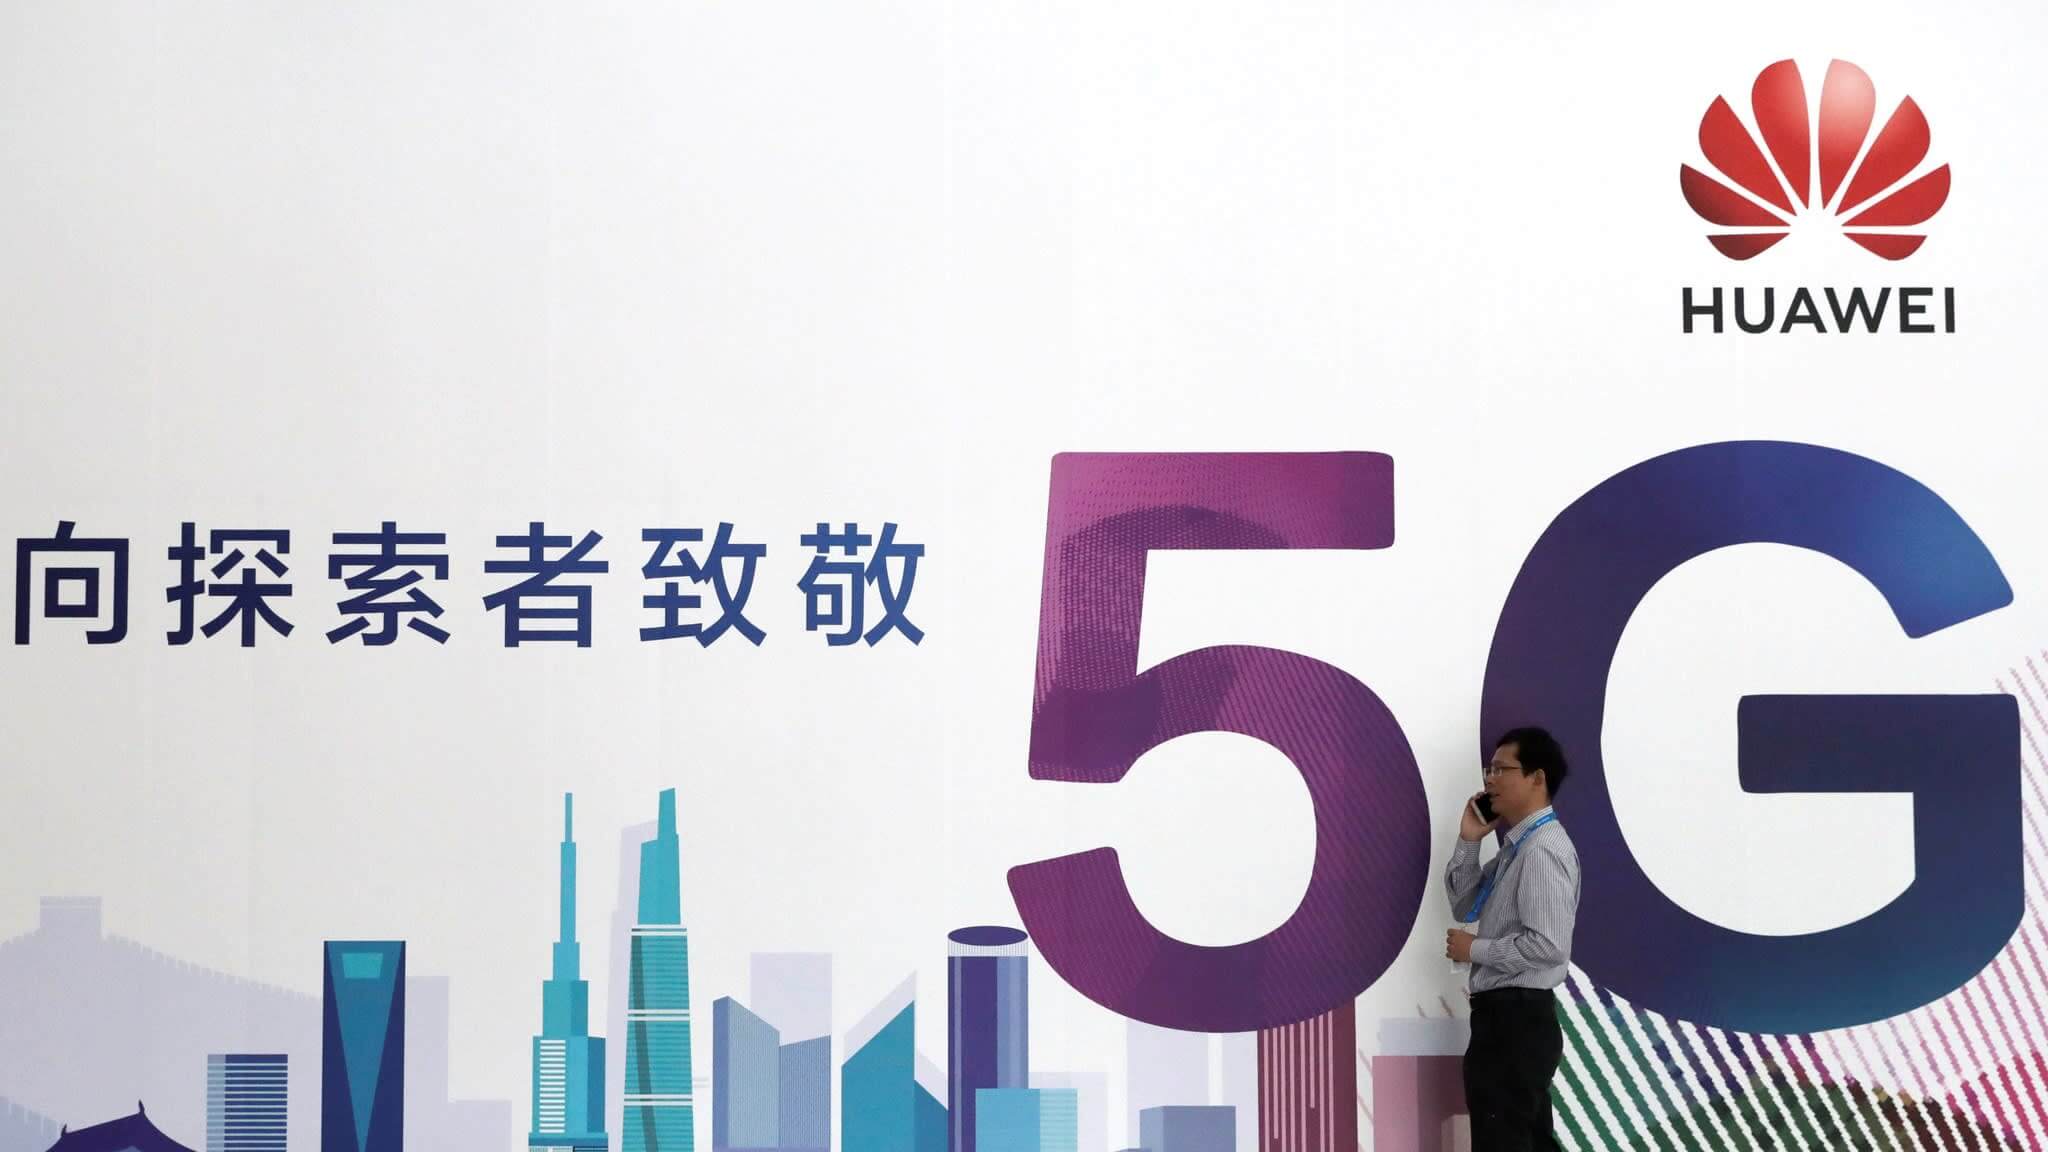 UK said to consider phasing out Huawei from its 5G deployment